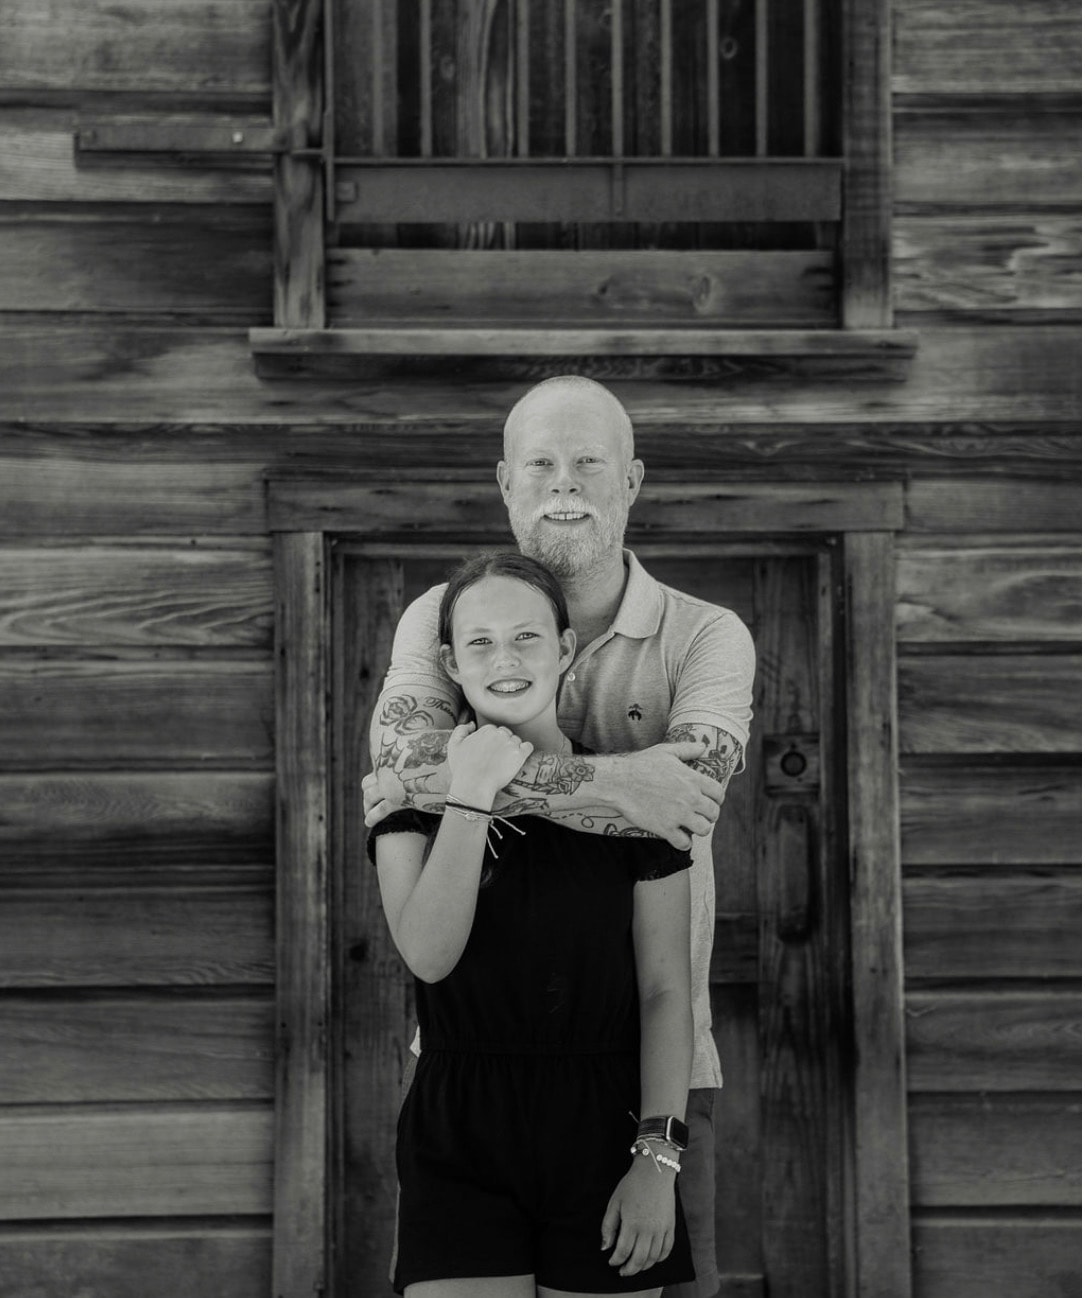 Black and white photo of a man and girl smiling in front of a wooden building.